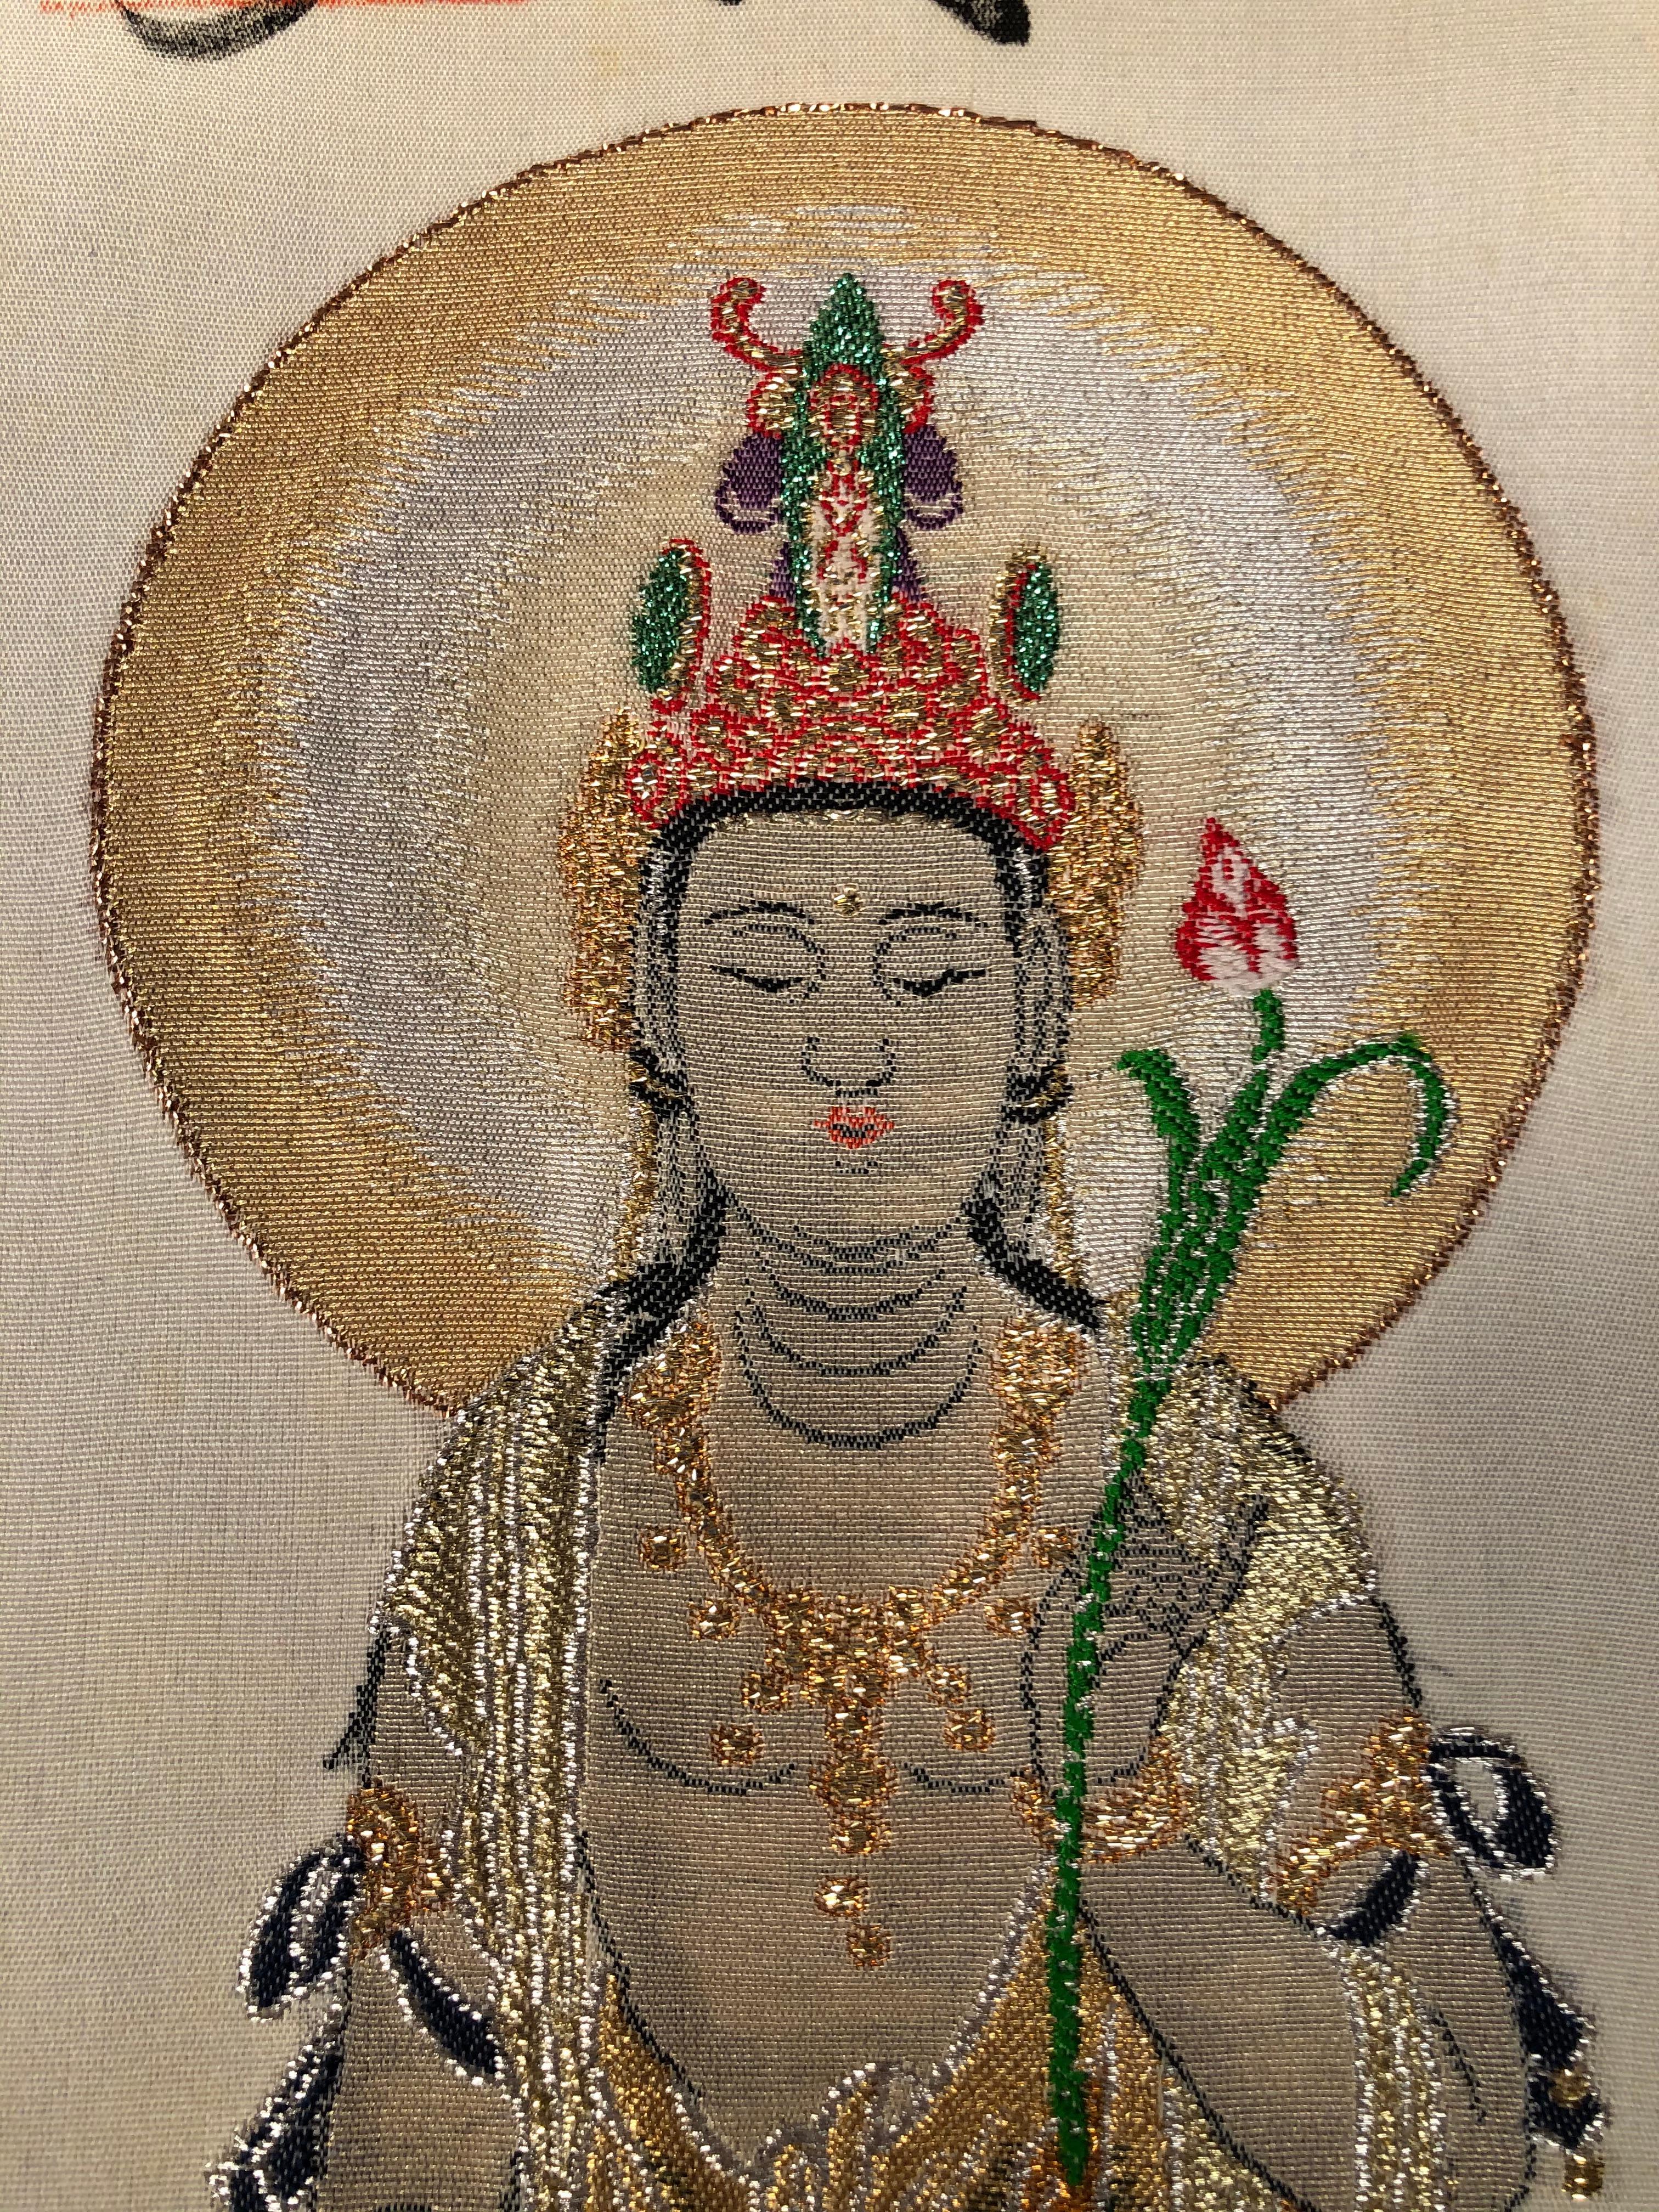 Hand-Painted Japanese Brilliant Colors Kanon Guanyin Buddha Pilgrimage Silk Scroll, Signed